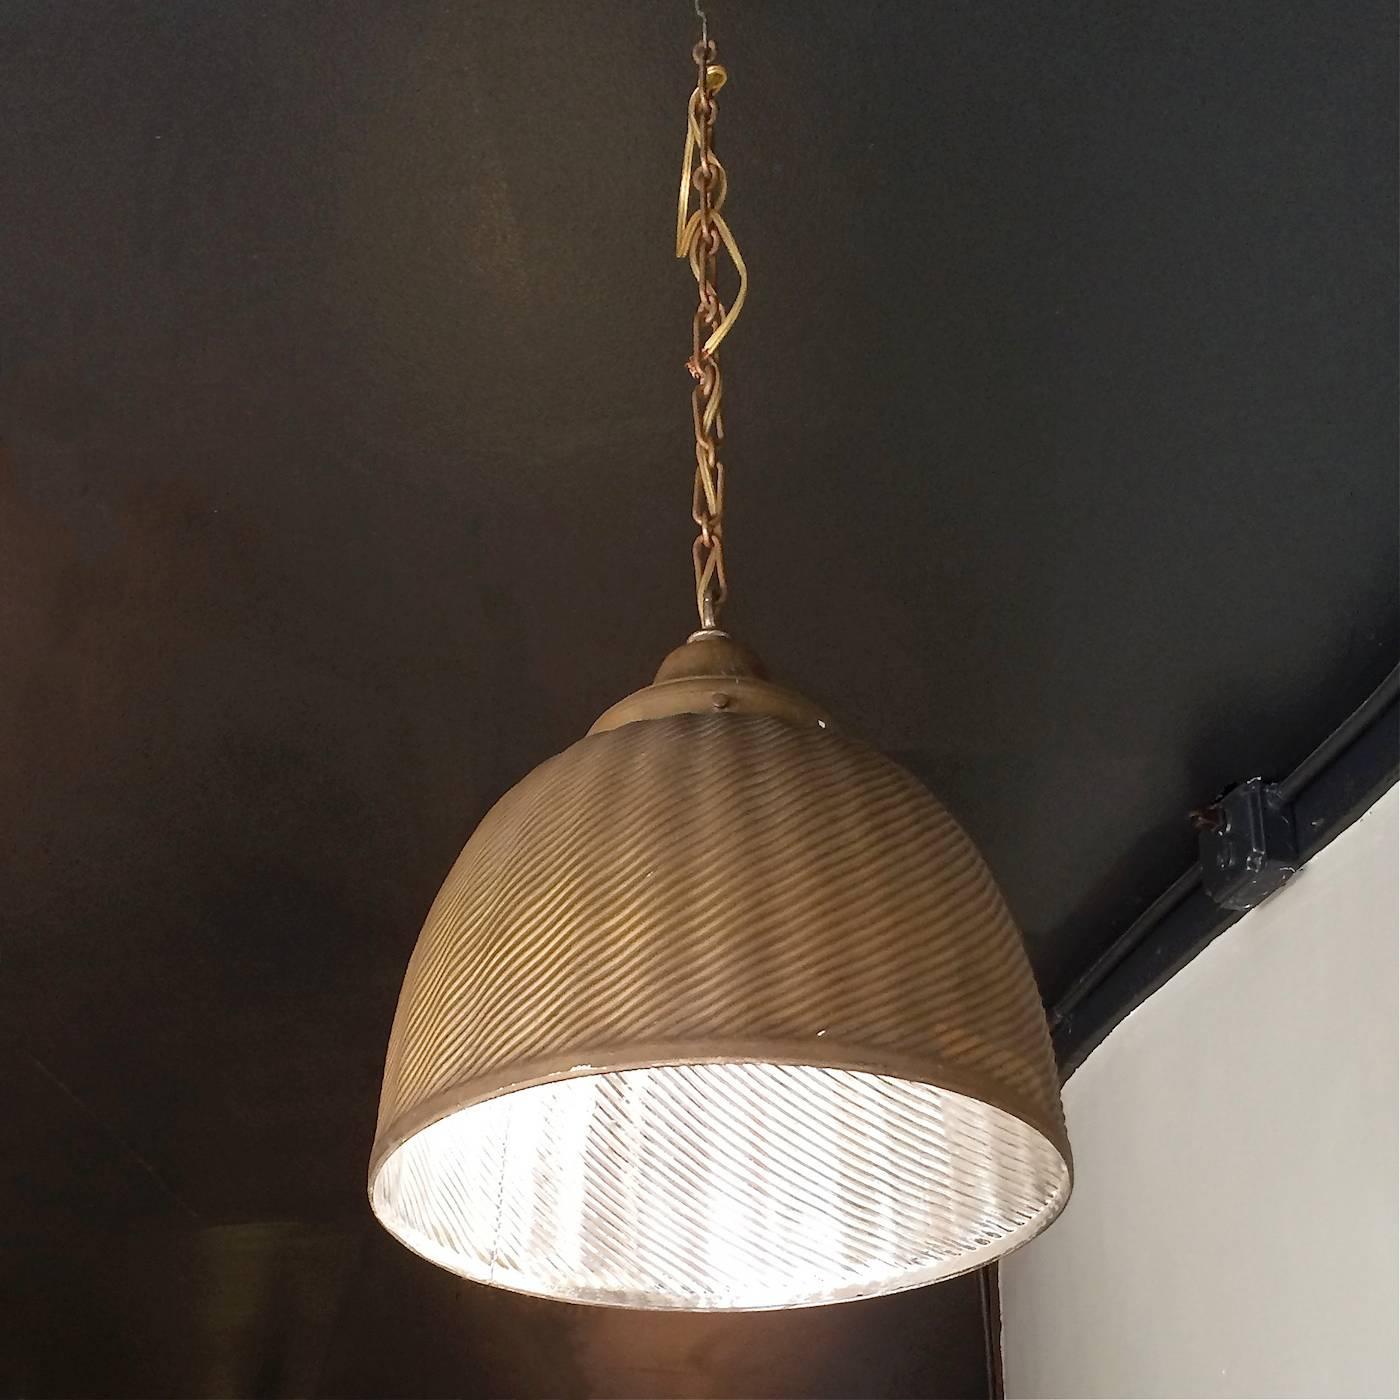 Industrial, mercury glass pendant light by X-Ray lamp company features a painted gold exterior with brass fitter and chain. Gold exterior paint is very intact. The chain length can be adjusted. The pendant is wired to accept up to a 150 watt bulb.